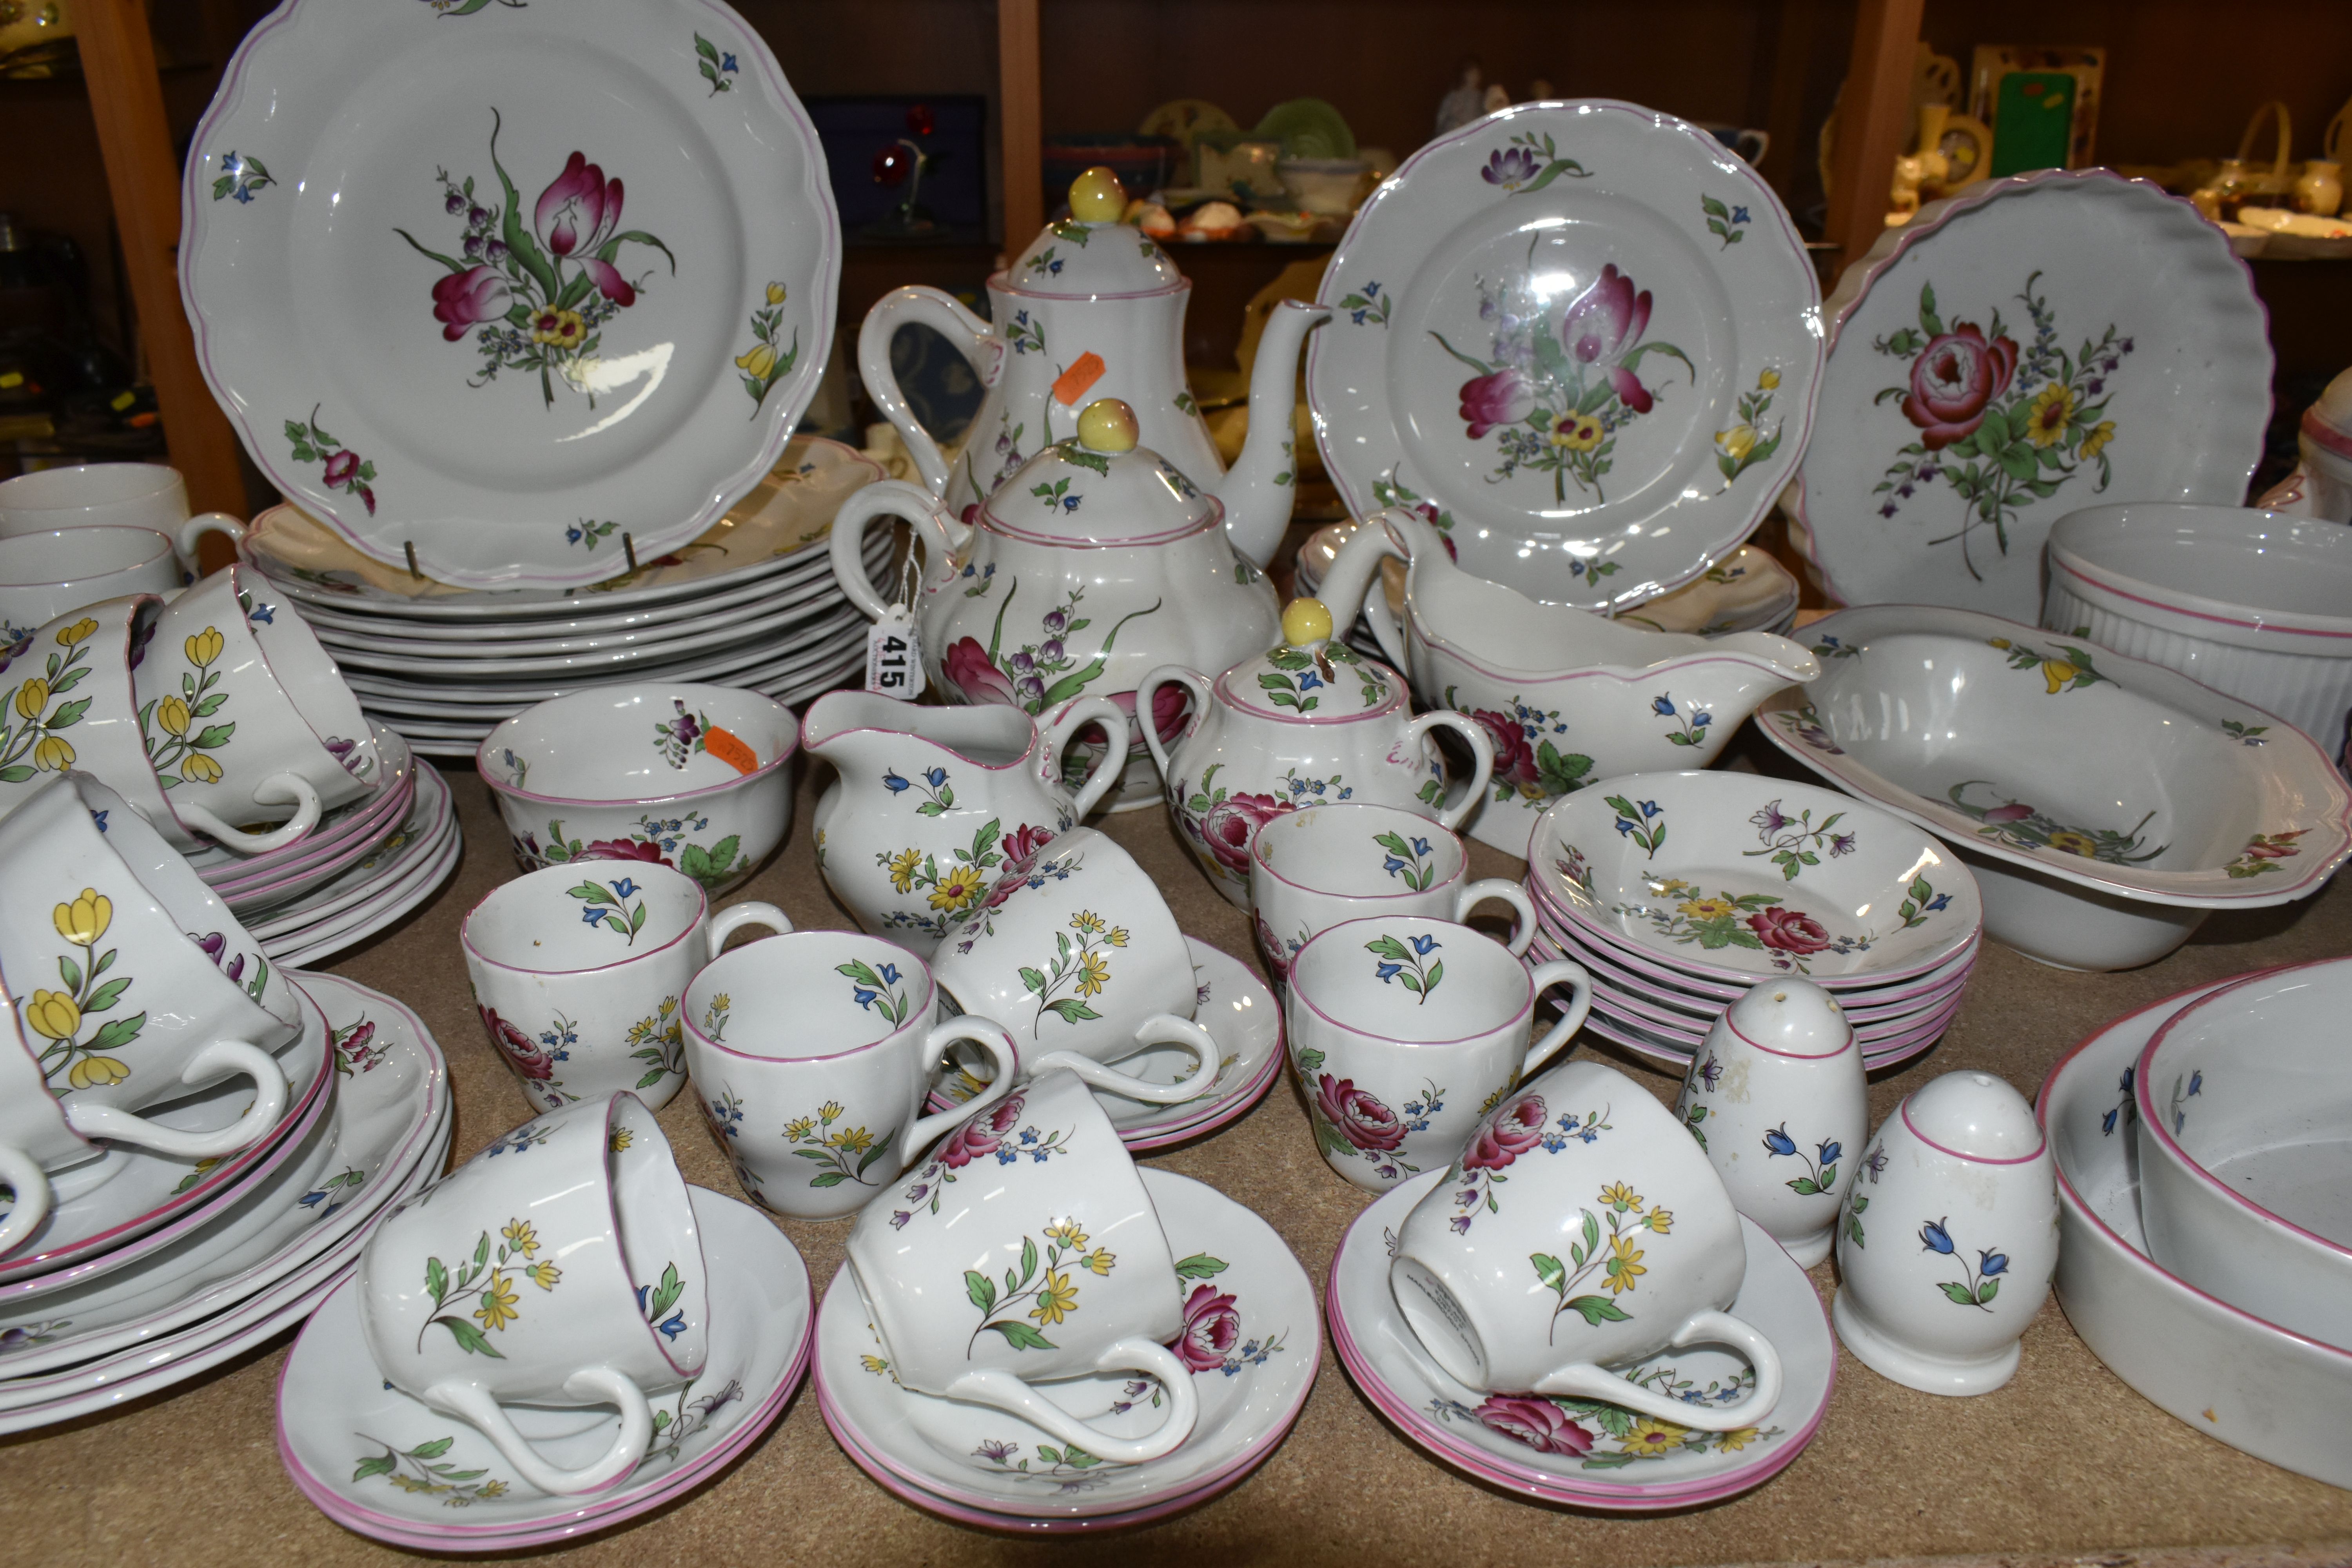 A ONE HUNDRED AND ONE PIECE SPODE MARLBOROUGH SPRAYS DINNER SERVICE, comprising a large round